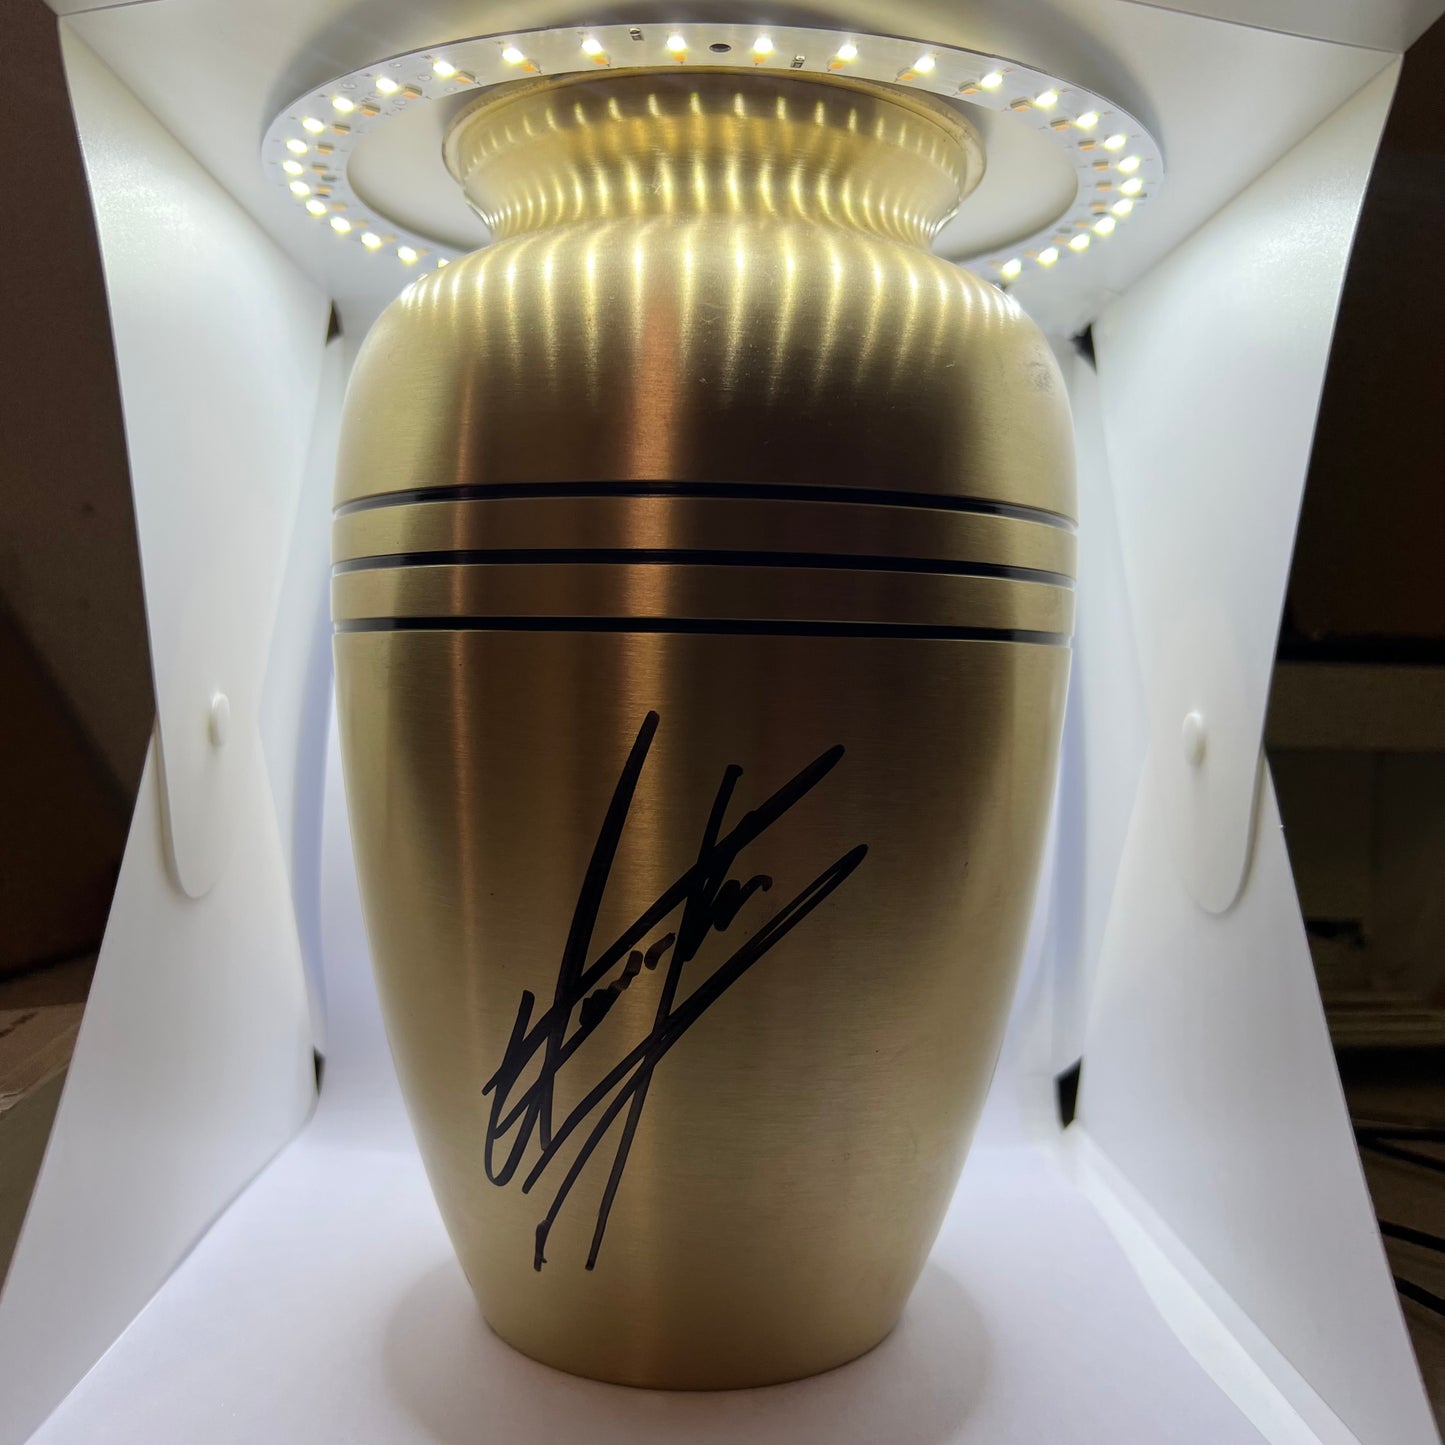 WWE Undertaker Autographed Signed Urn with JSA Certification Collectable